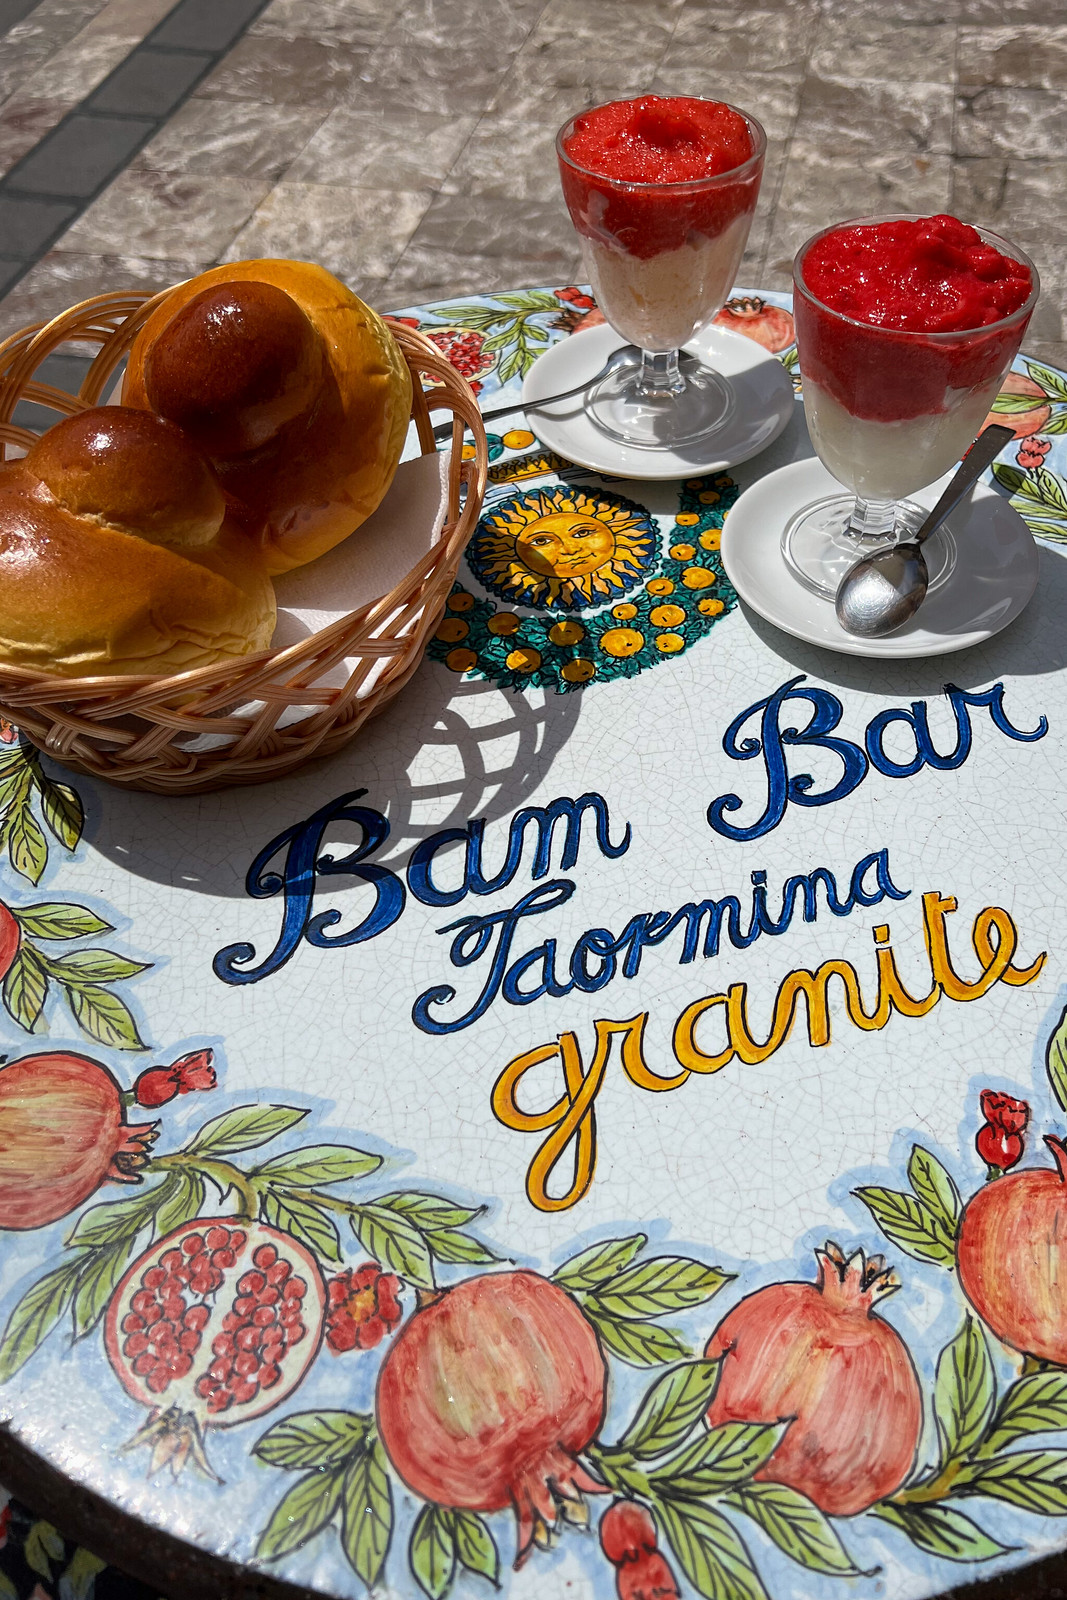 Bam Bar Sicilian Granita | Taormina, Sicily Travel Guide | Where to eat in Taormina | Discover the Best Things to do in Taormina, Sicily, Italy | Visit Sicily | Sicily Food | Sicily Travel Tips 